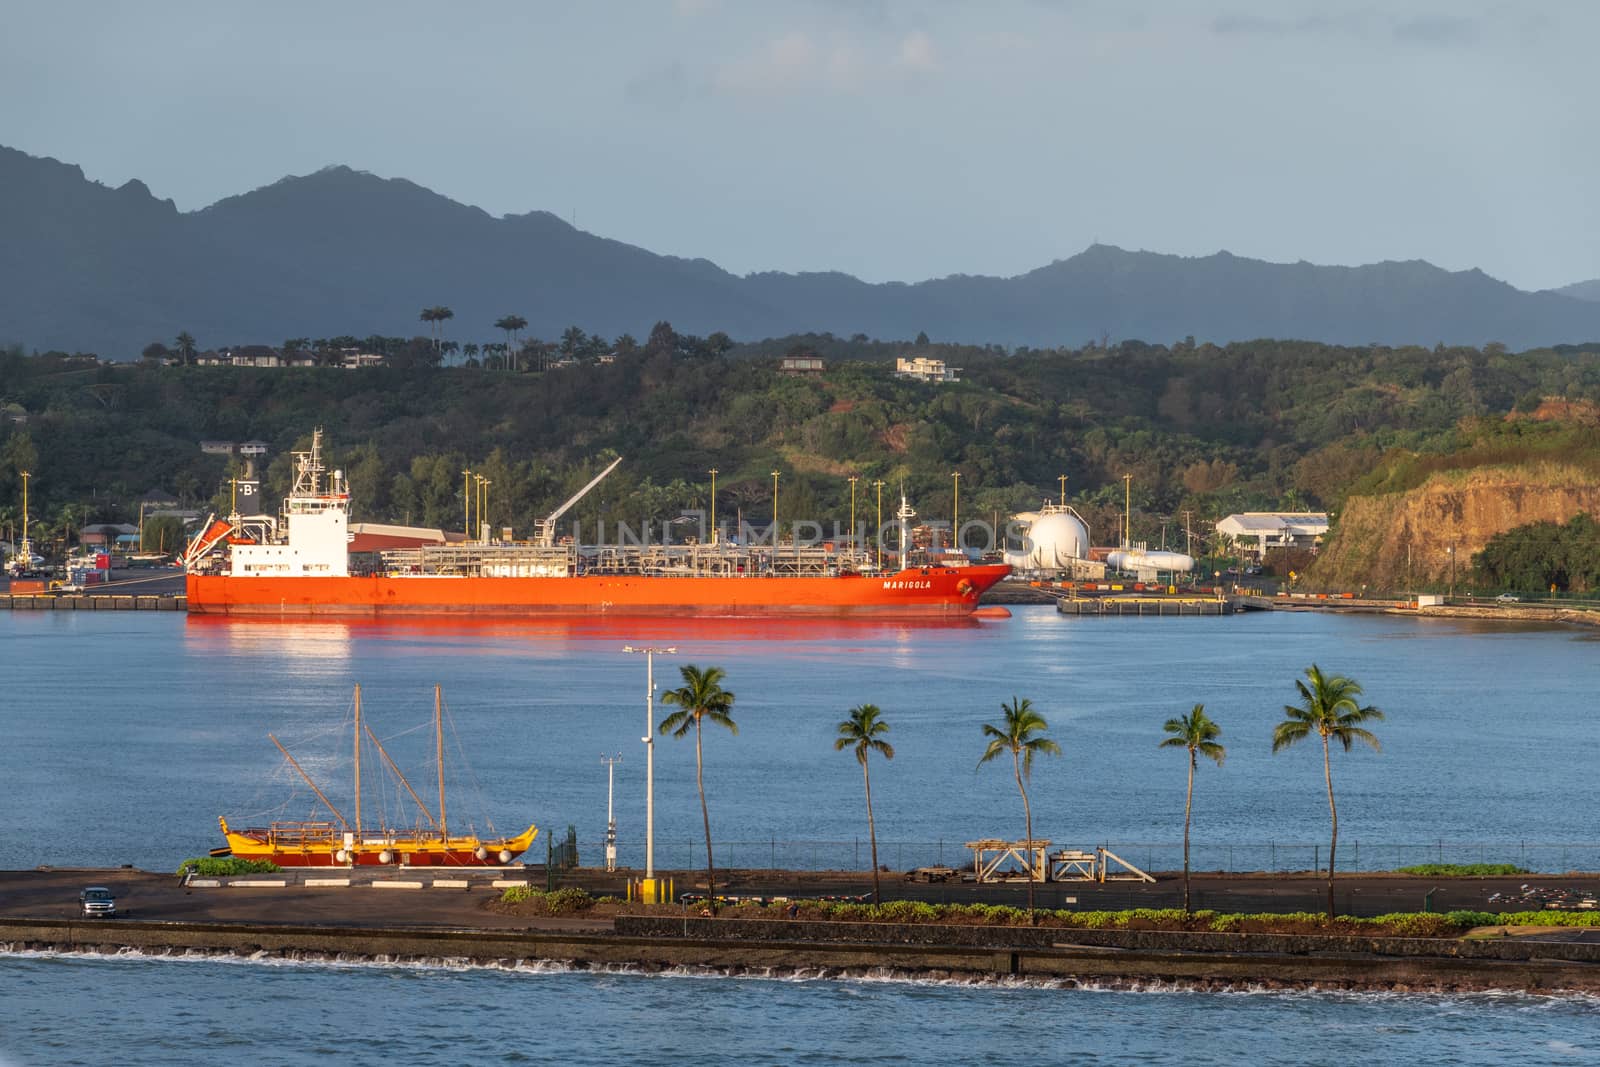 Nawiliwili, Kauai, Hawaii, USA. - January 16, 2020: Early morning light on red Marigola LPG tanker in port under light blue sky. Green belt on hill. Blue ocean water and pier in front with historic sail boat.